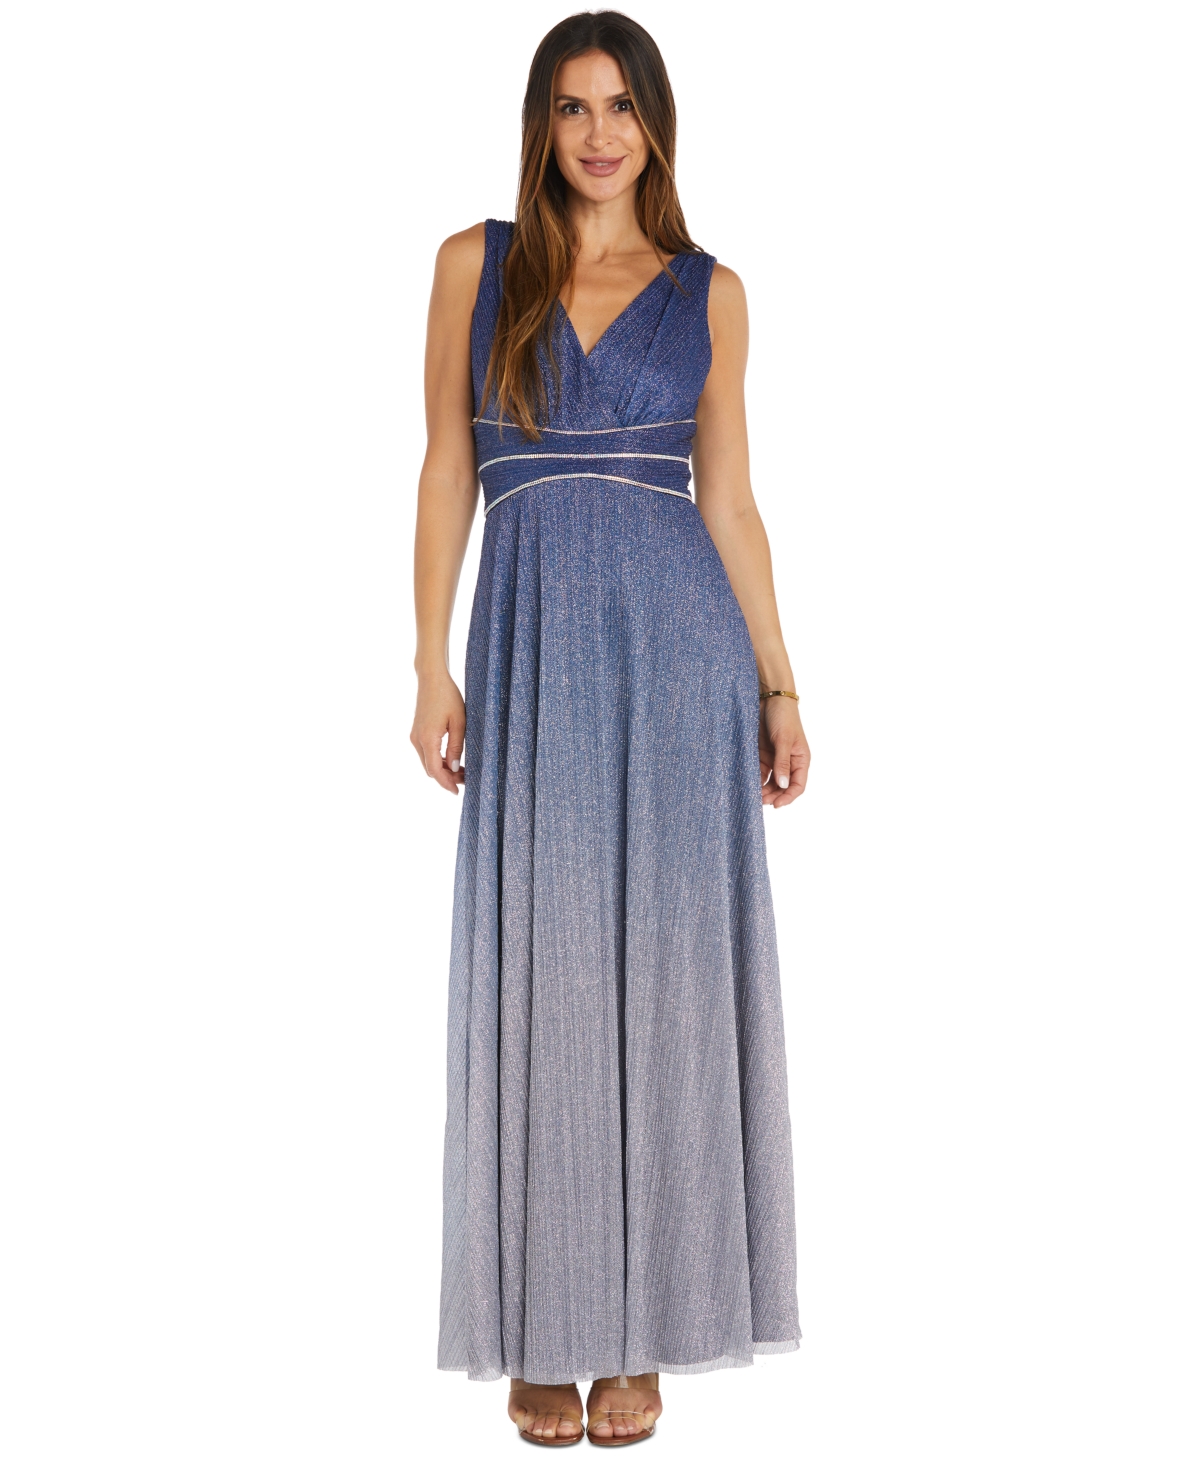 Women's Embellished Ombre Metallic Gown - Turquoise